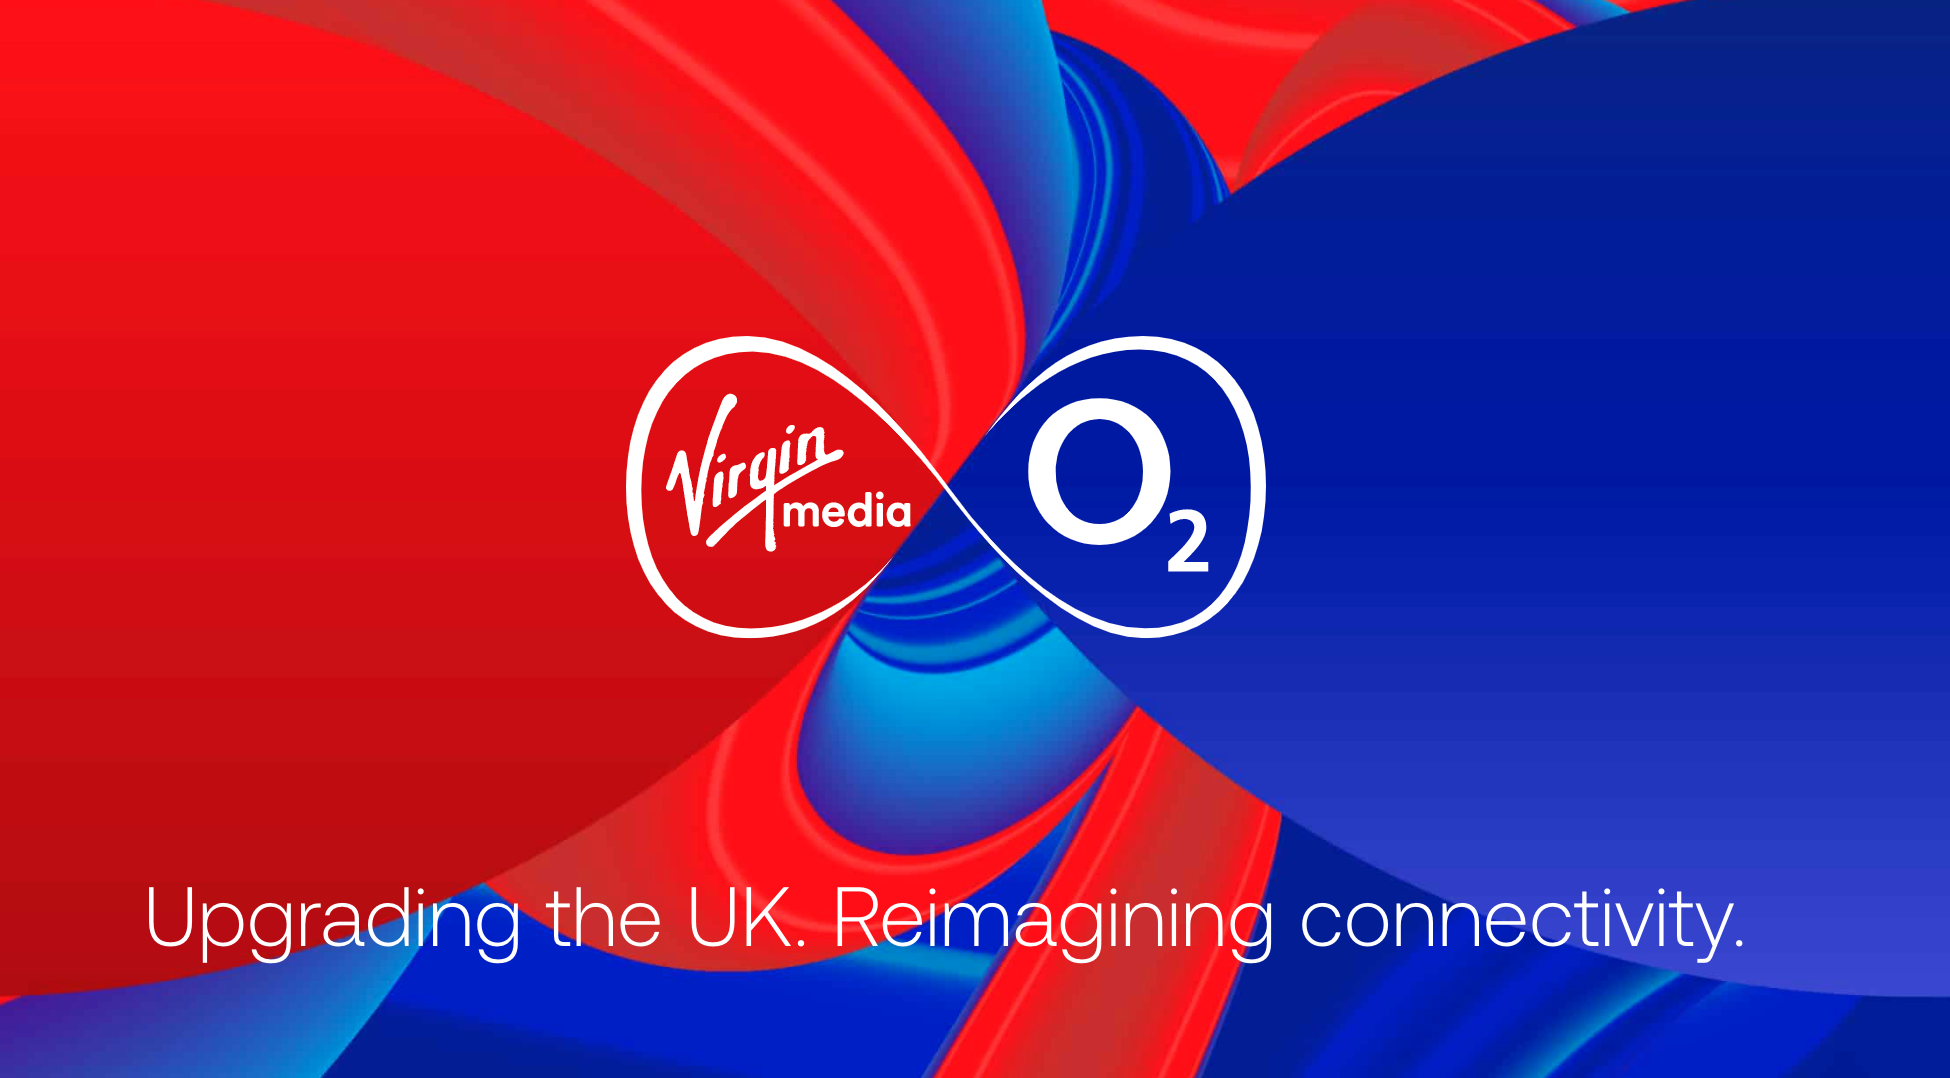 Virgin Media O2 - upgrading the UK and reimagining connectivity